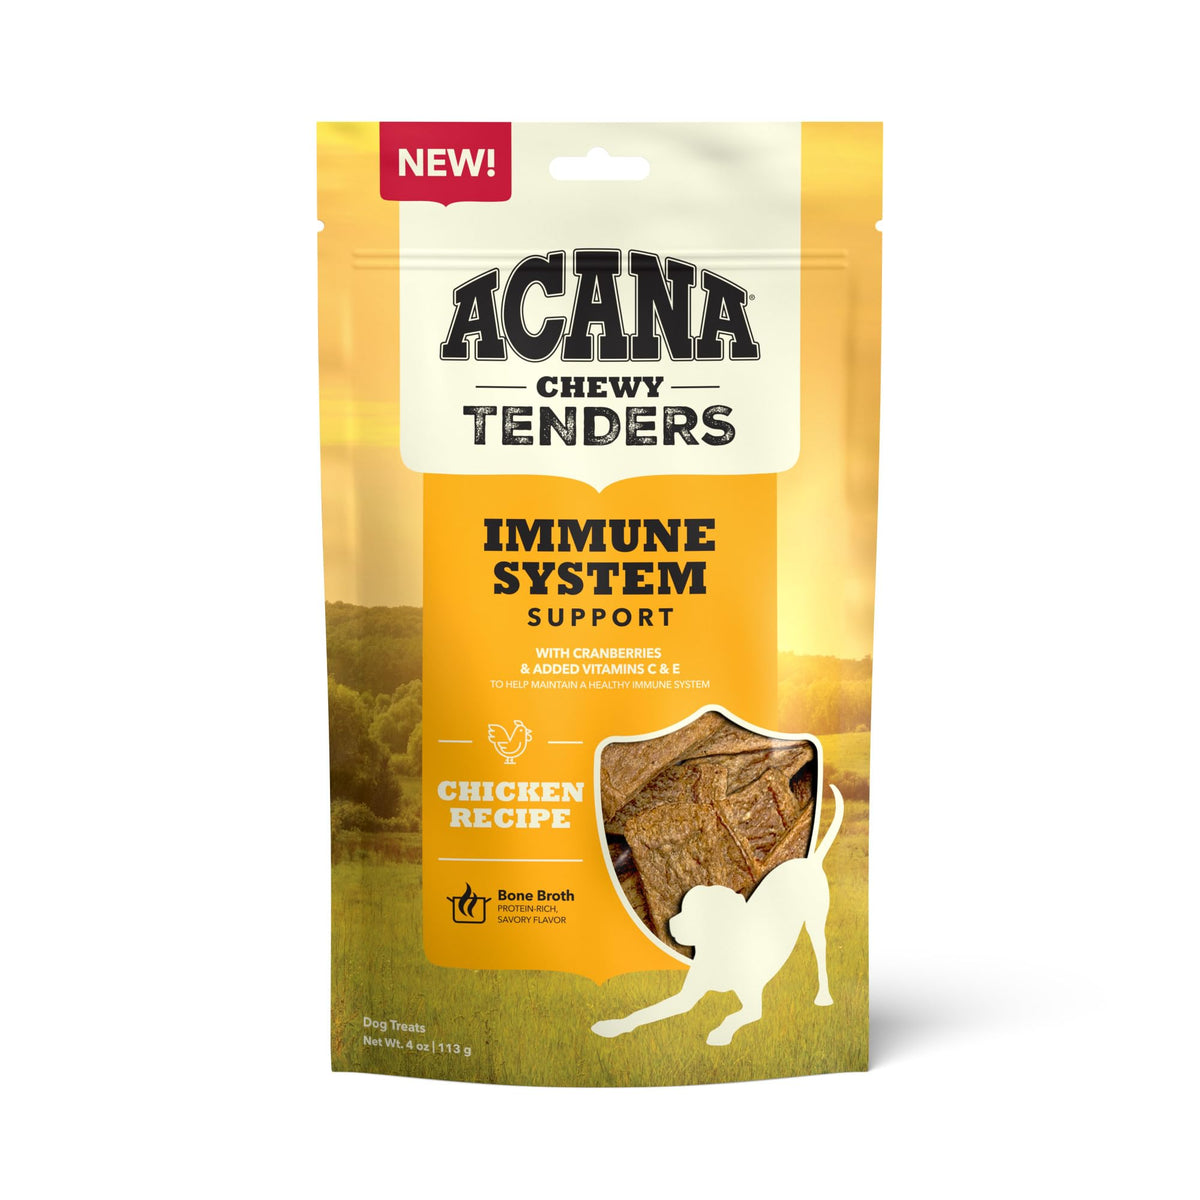 ACANA Chewy Tenders Dog Treats, Chicken, Chewy Poultry Treats, 4oz